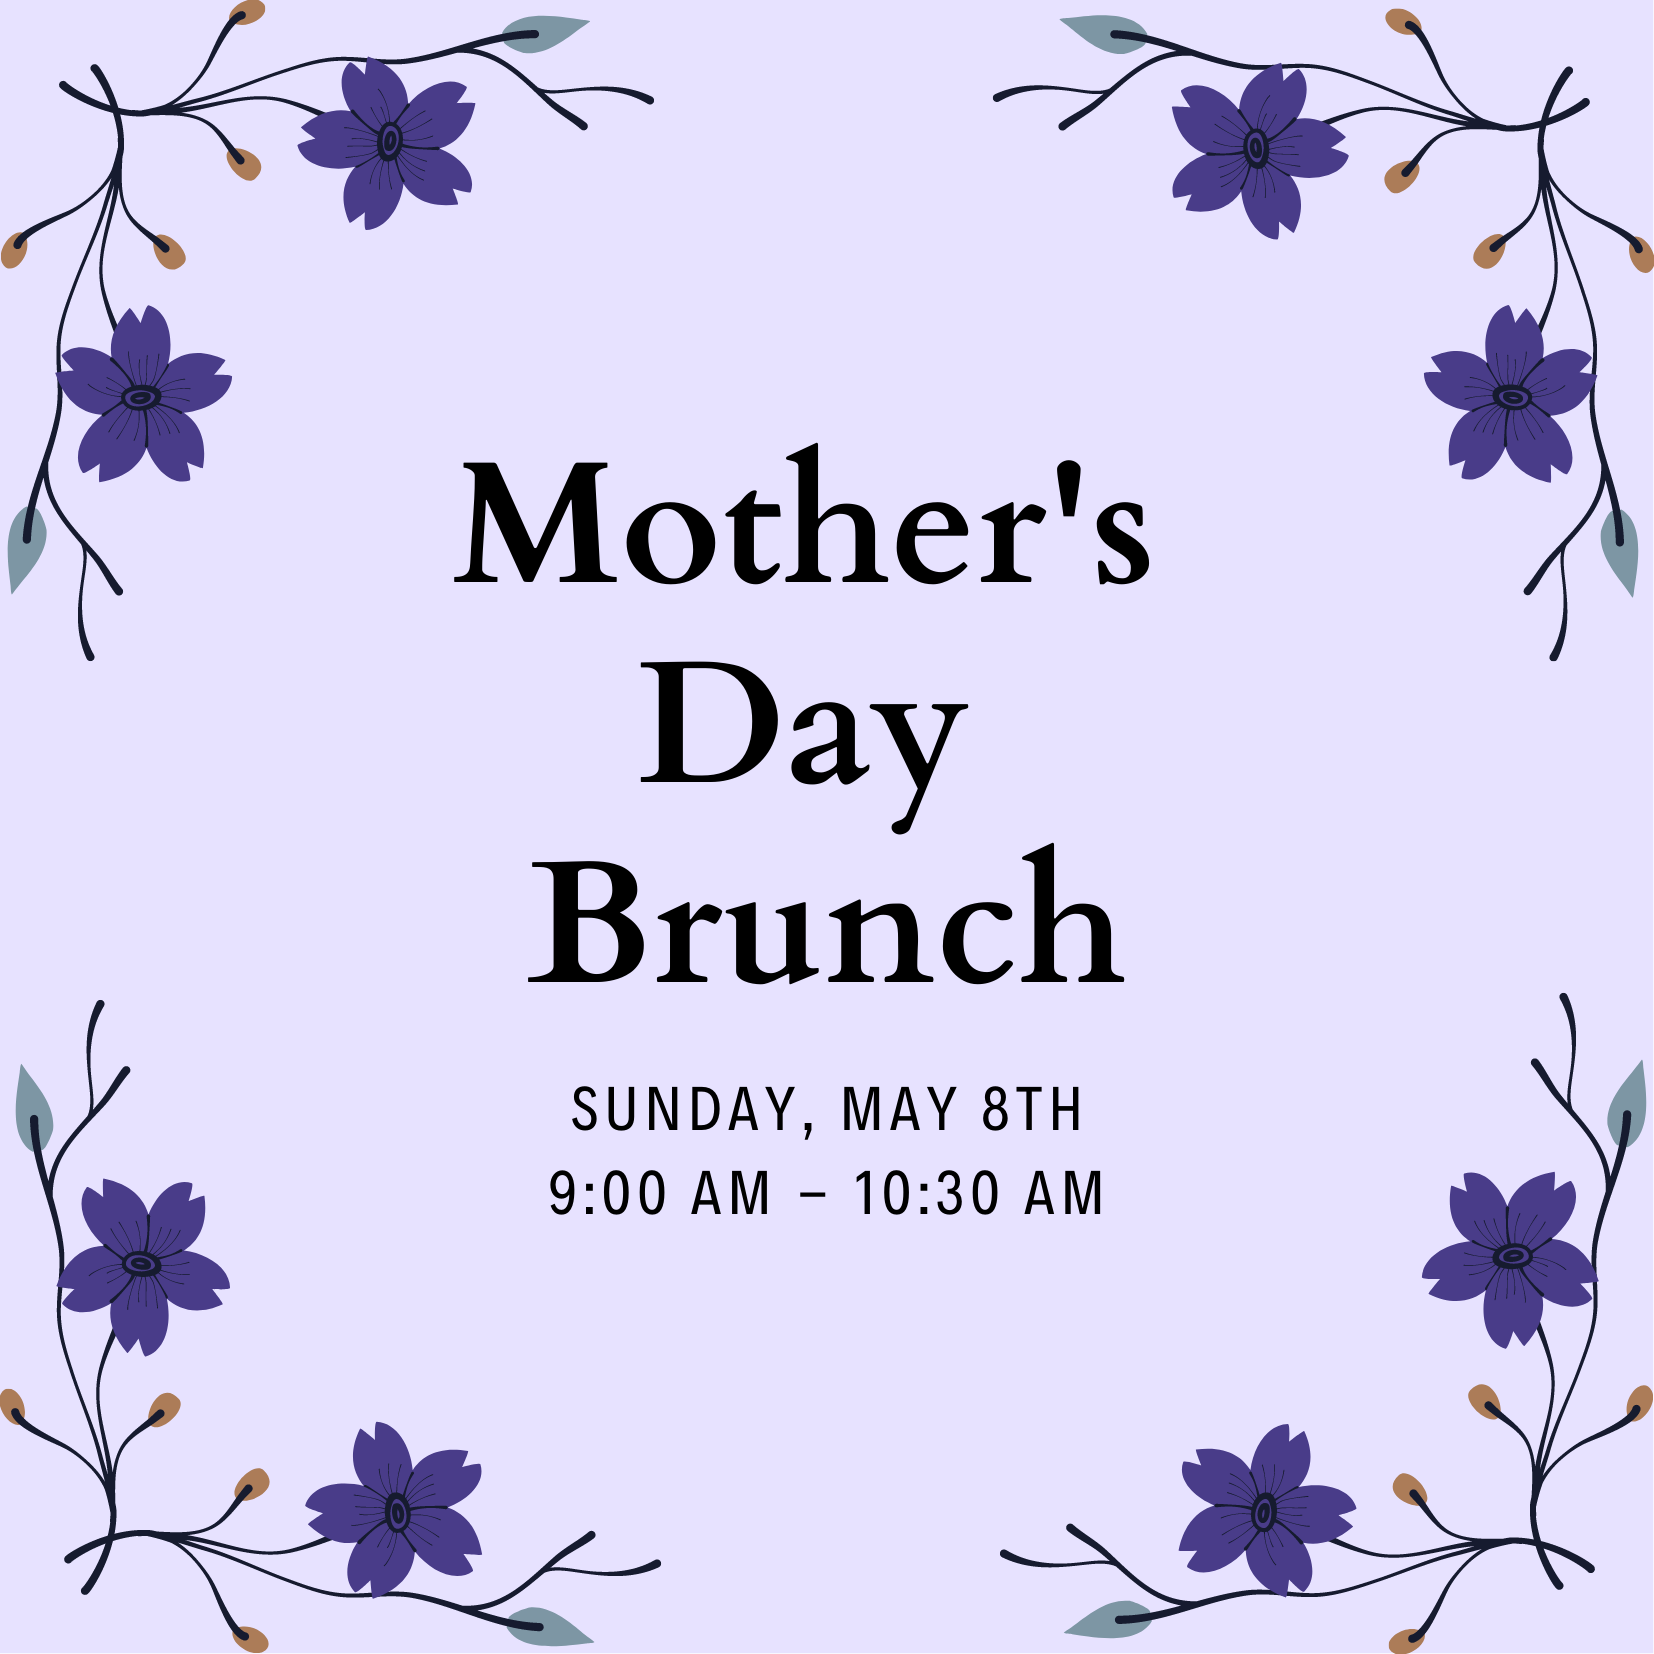 Mother's Day Brunch, May 8th: 9 -10:30 AM